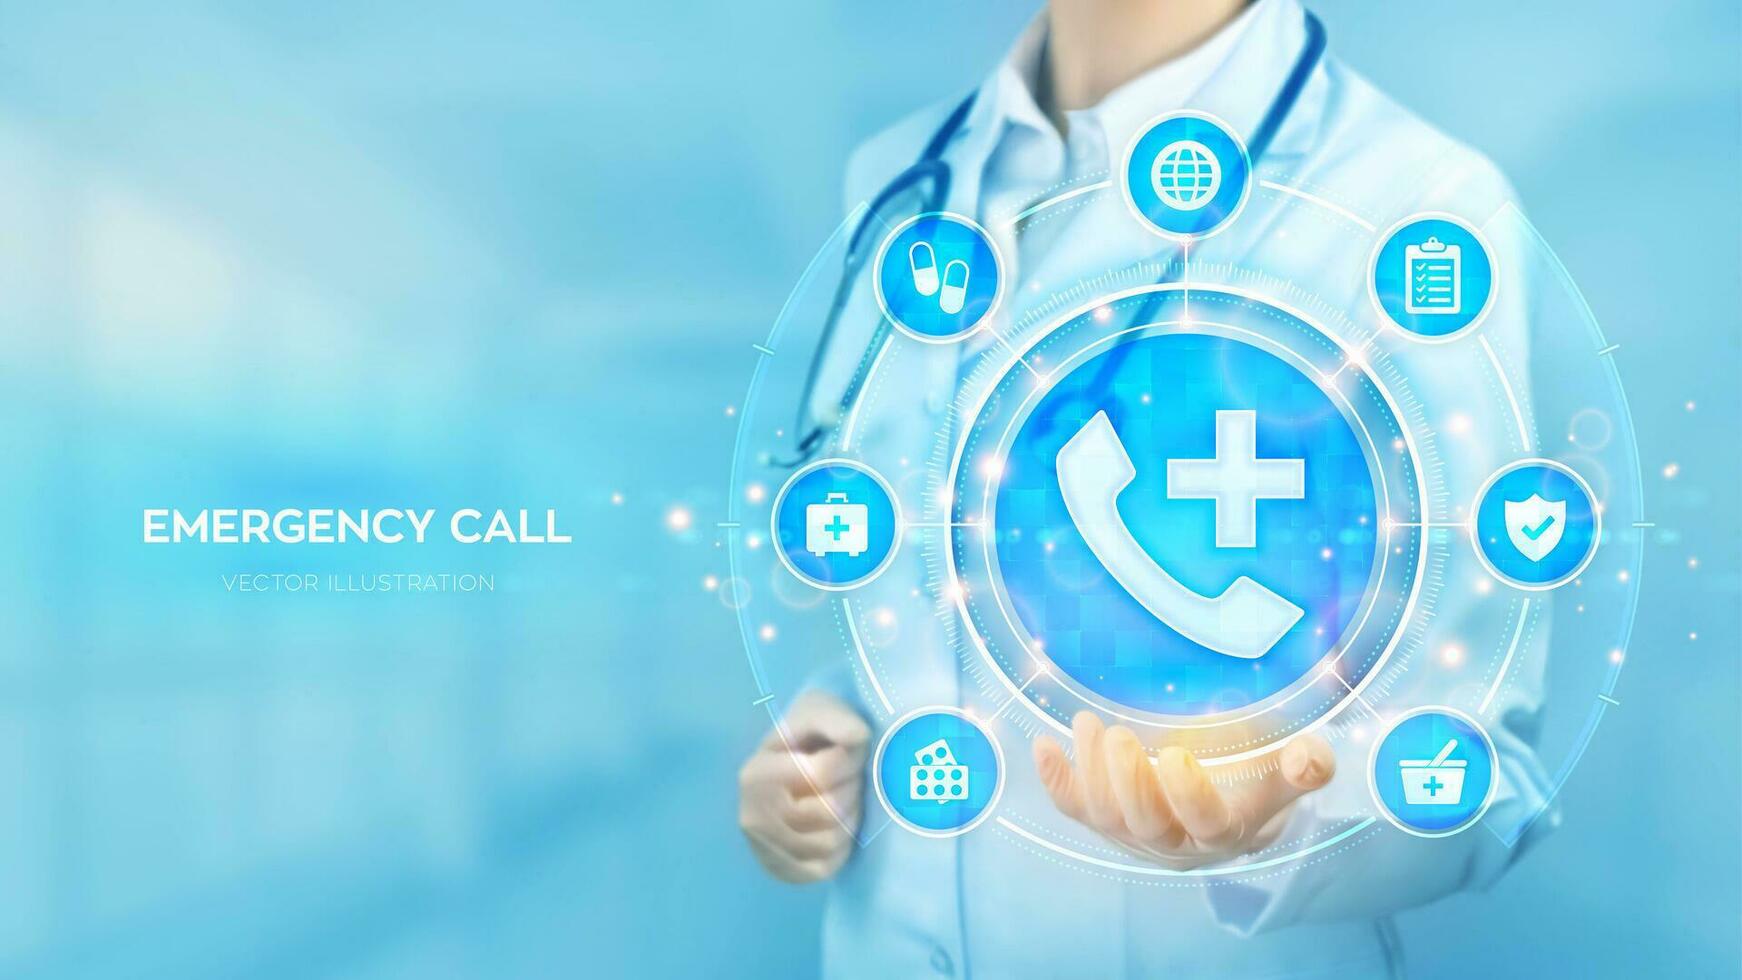 Emergency call. Medical call center hotline. SOS. First aid. Emergency application. Doctor holding in hand Phone call sign, medicine icons network connection on virtual screen. Vector illustration.